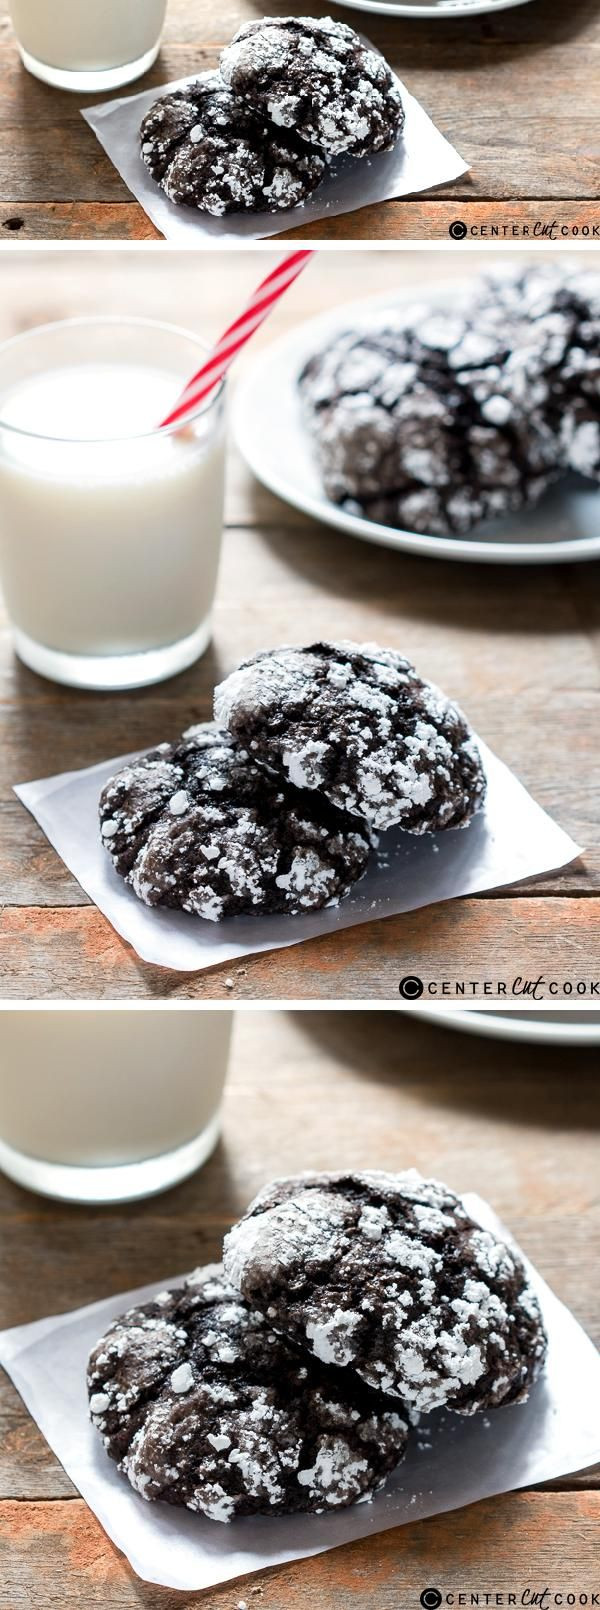 Chocolate Christmas Cookies With Powdered Sugar
 25 best ideas about Chocolate crinkle cookies on